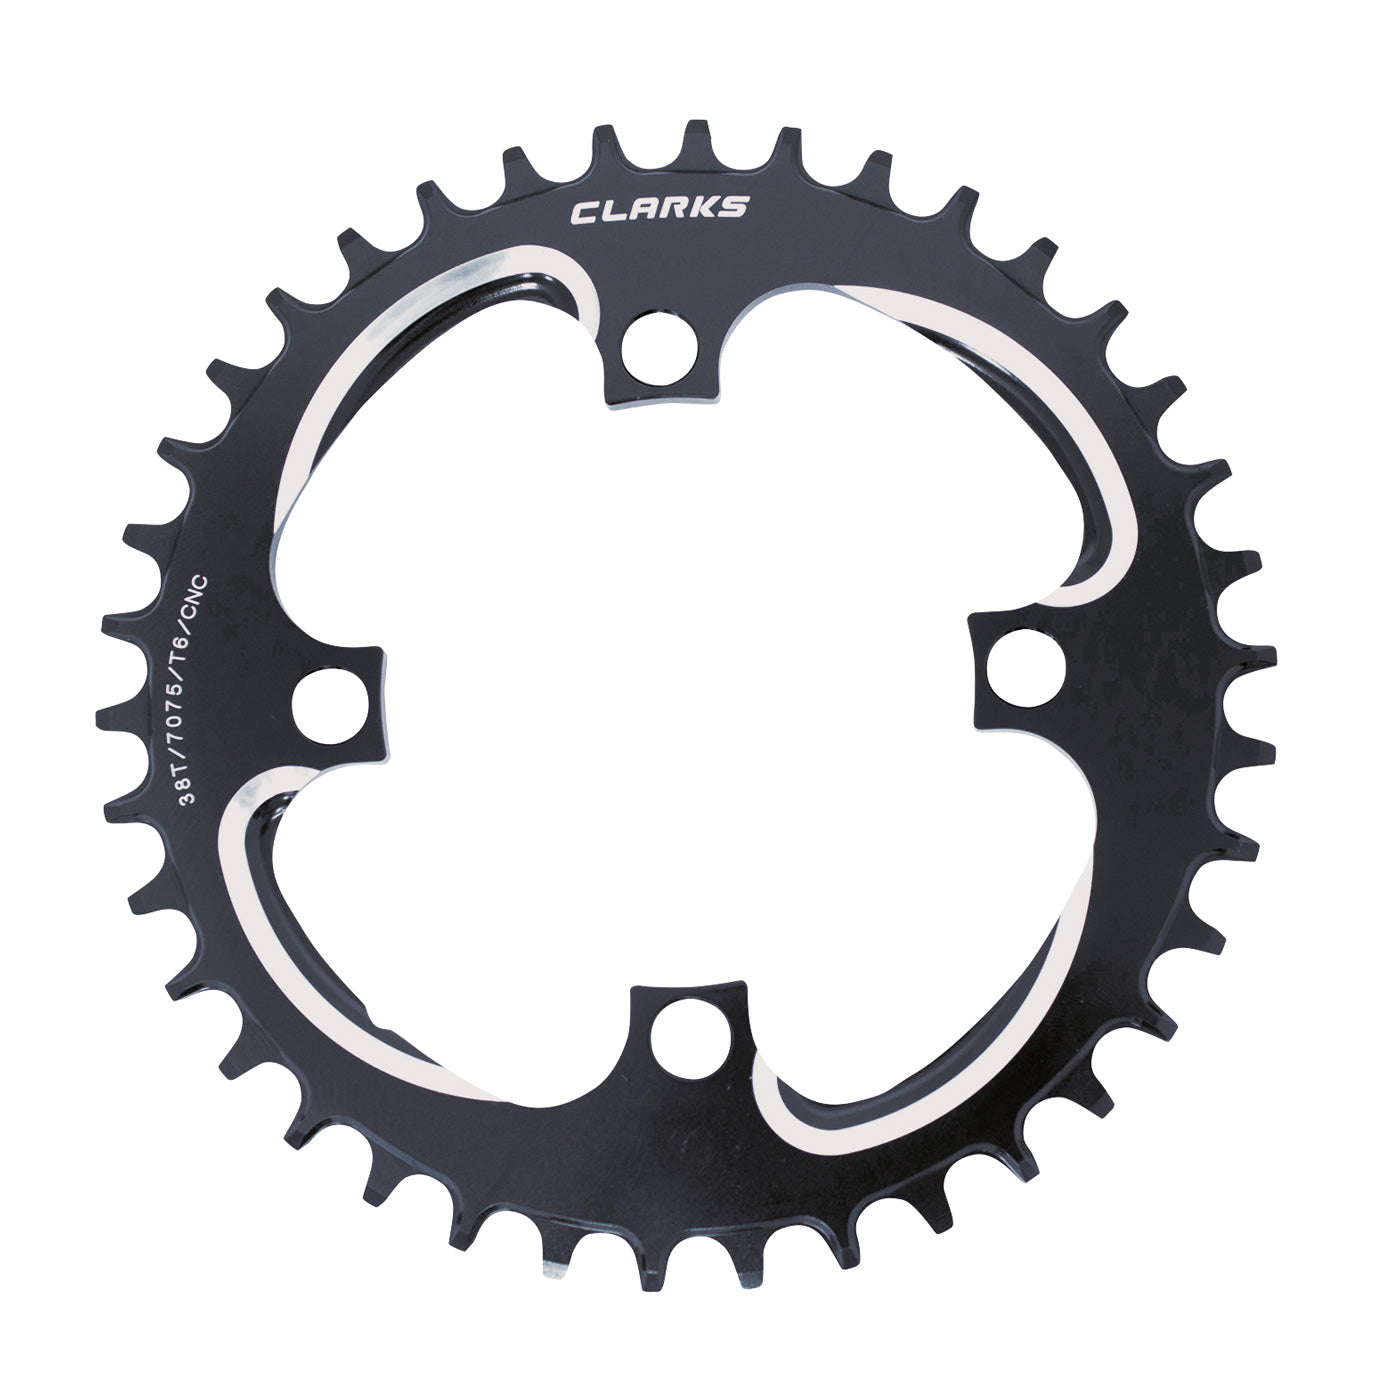 View 4 Bolt Alloy chainring 94BCD 36t information